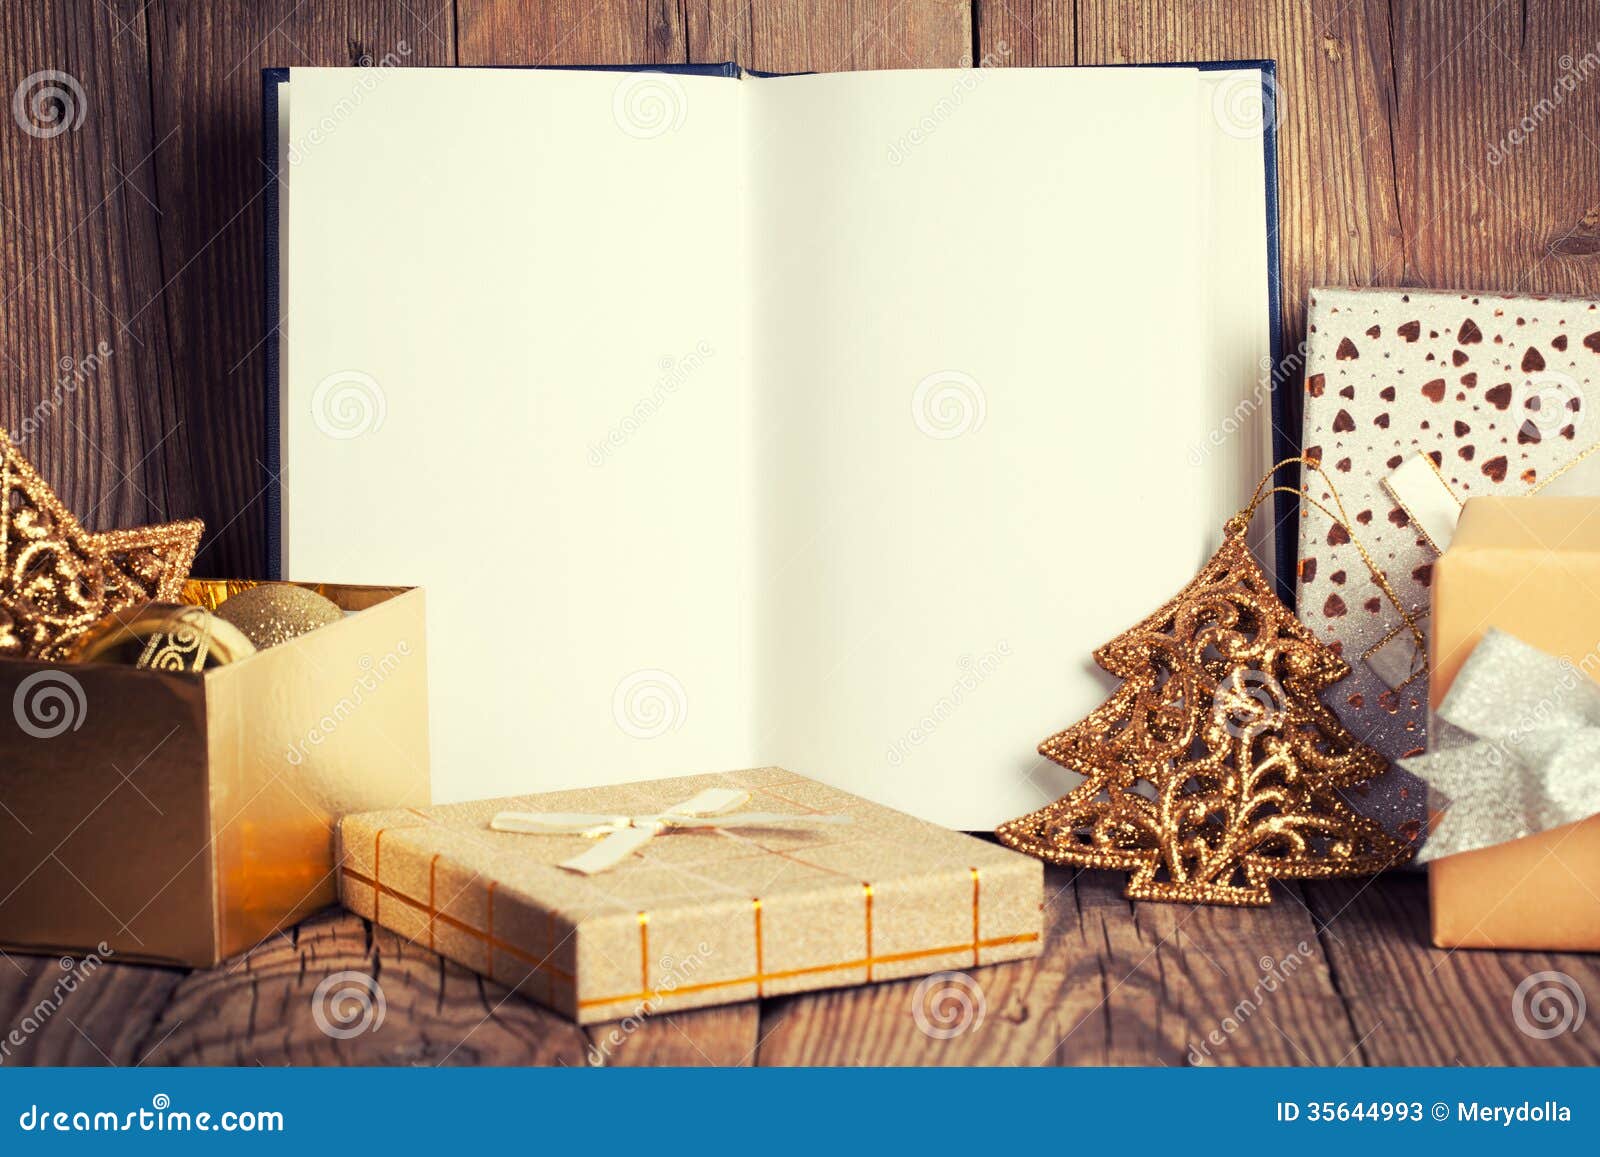 Open Book With Christmas Decoration Stock Photos - Image 